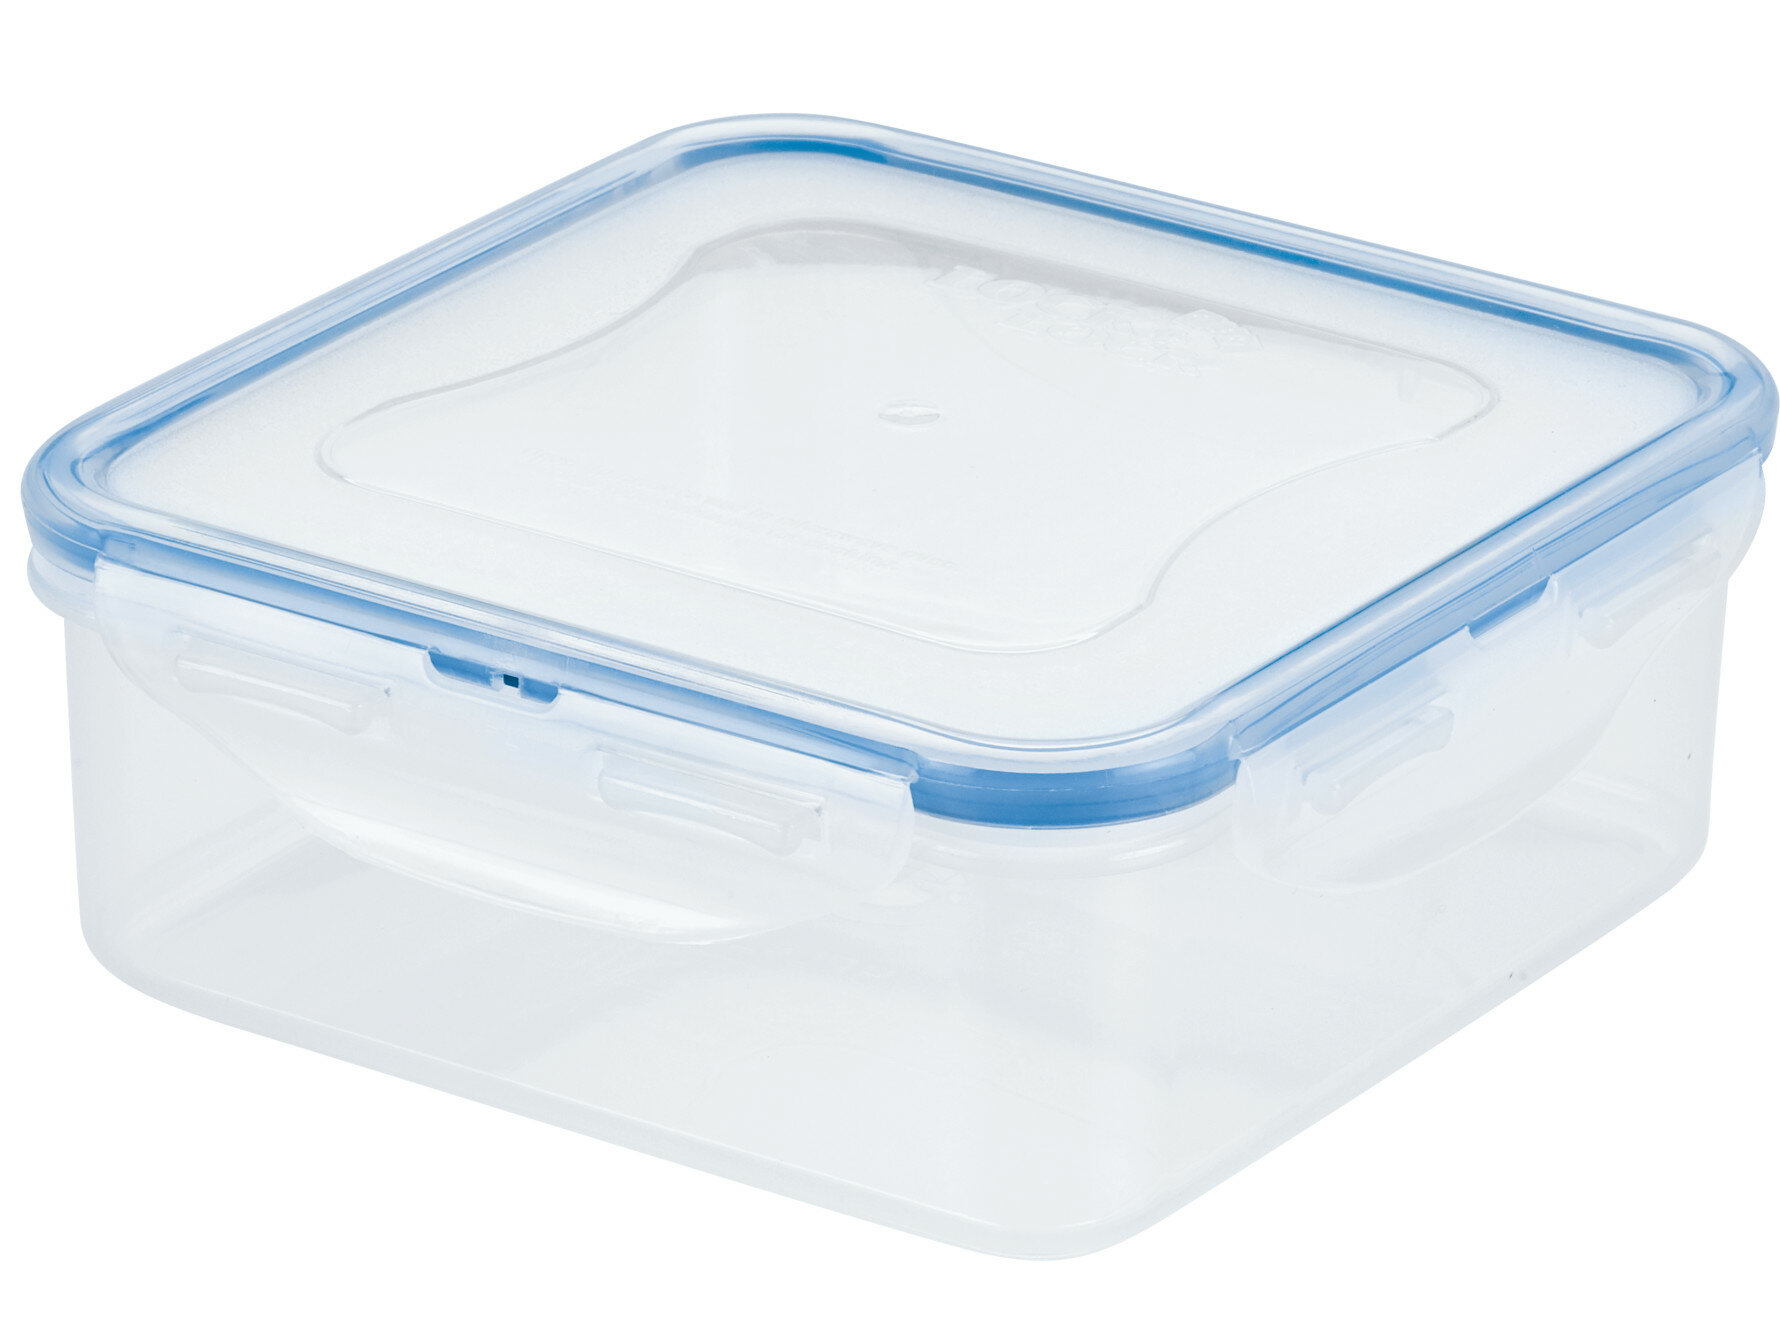 Large Plastic Food Storage Container with airtight Lid for Pantry, Fridge-  10 Cup, 80 Oz- BPA Free, Leakproof Sealed Container- Microwave, Dishwasher